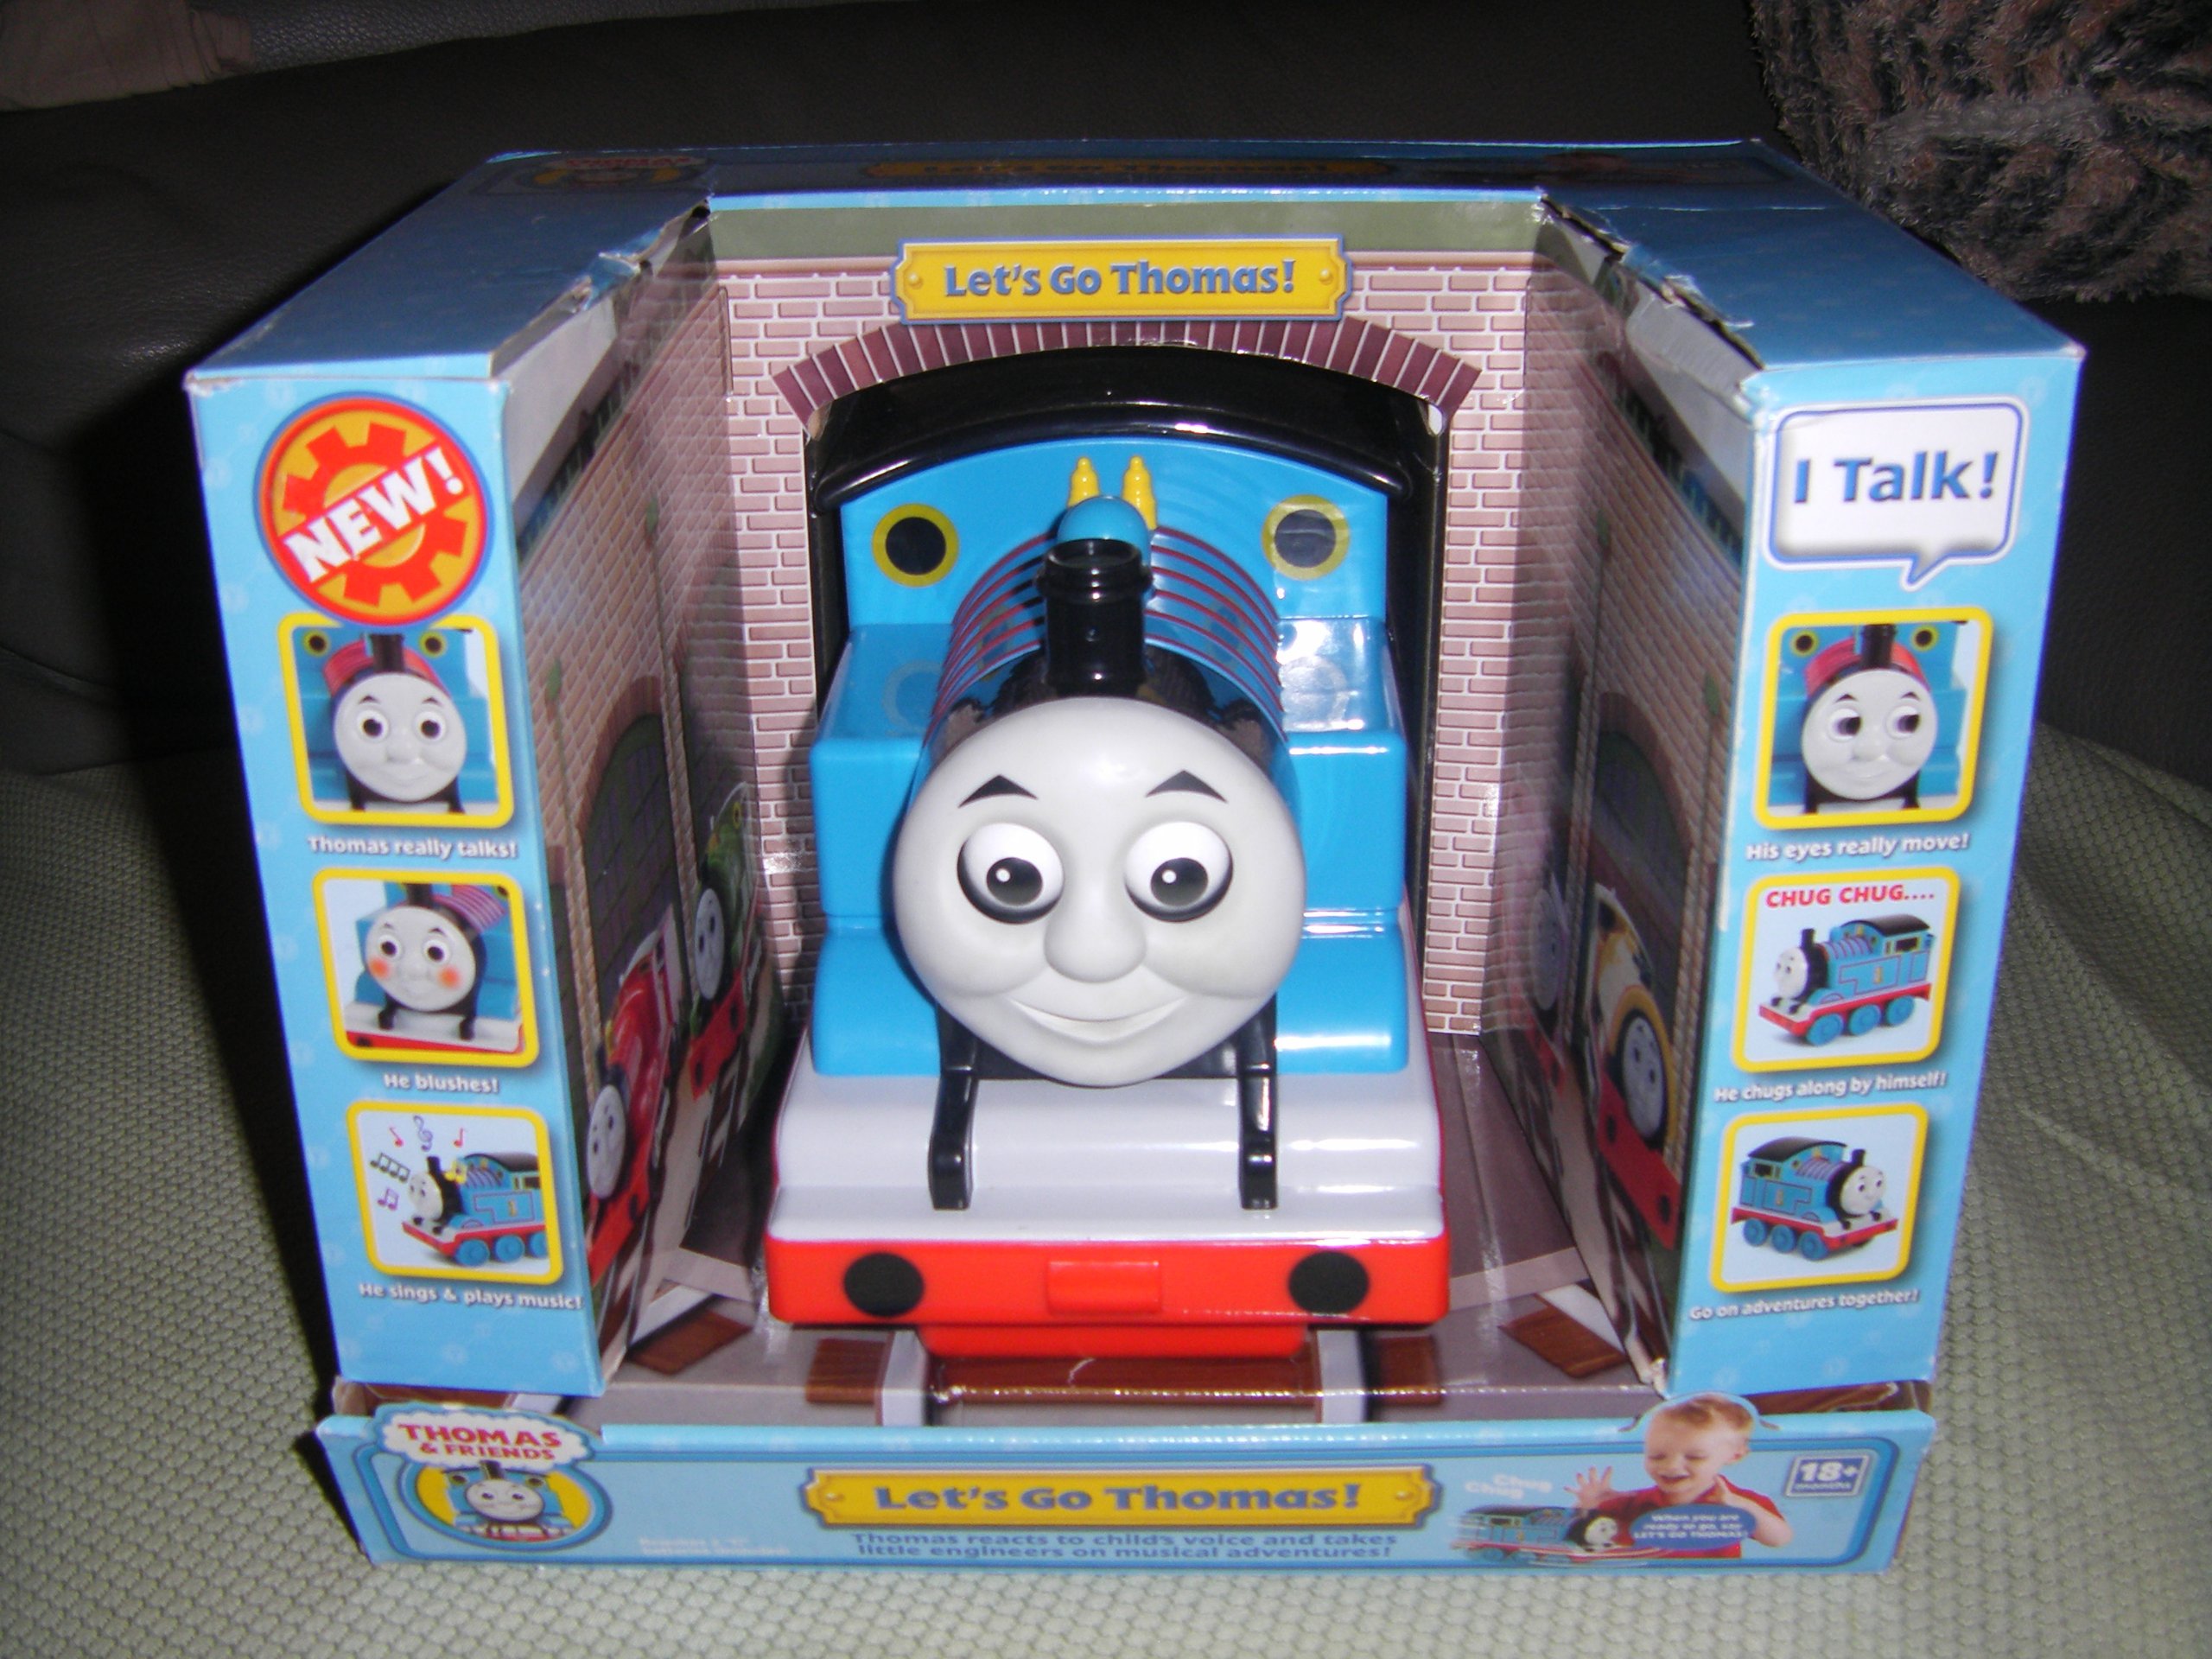 A Let's Go Thomas toy in box. This photo shows the front of it.